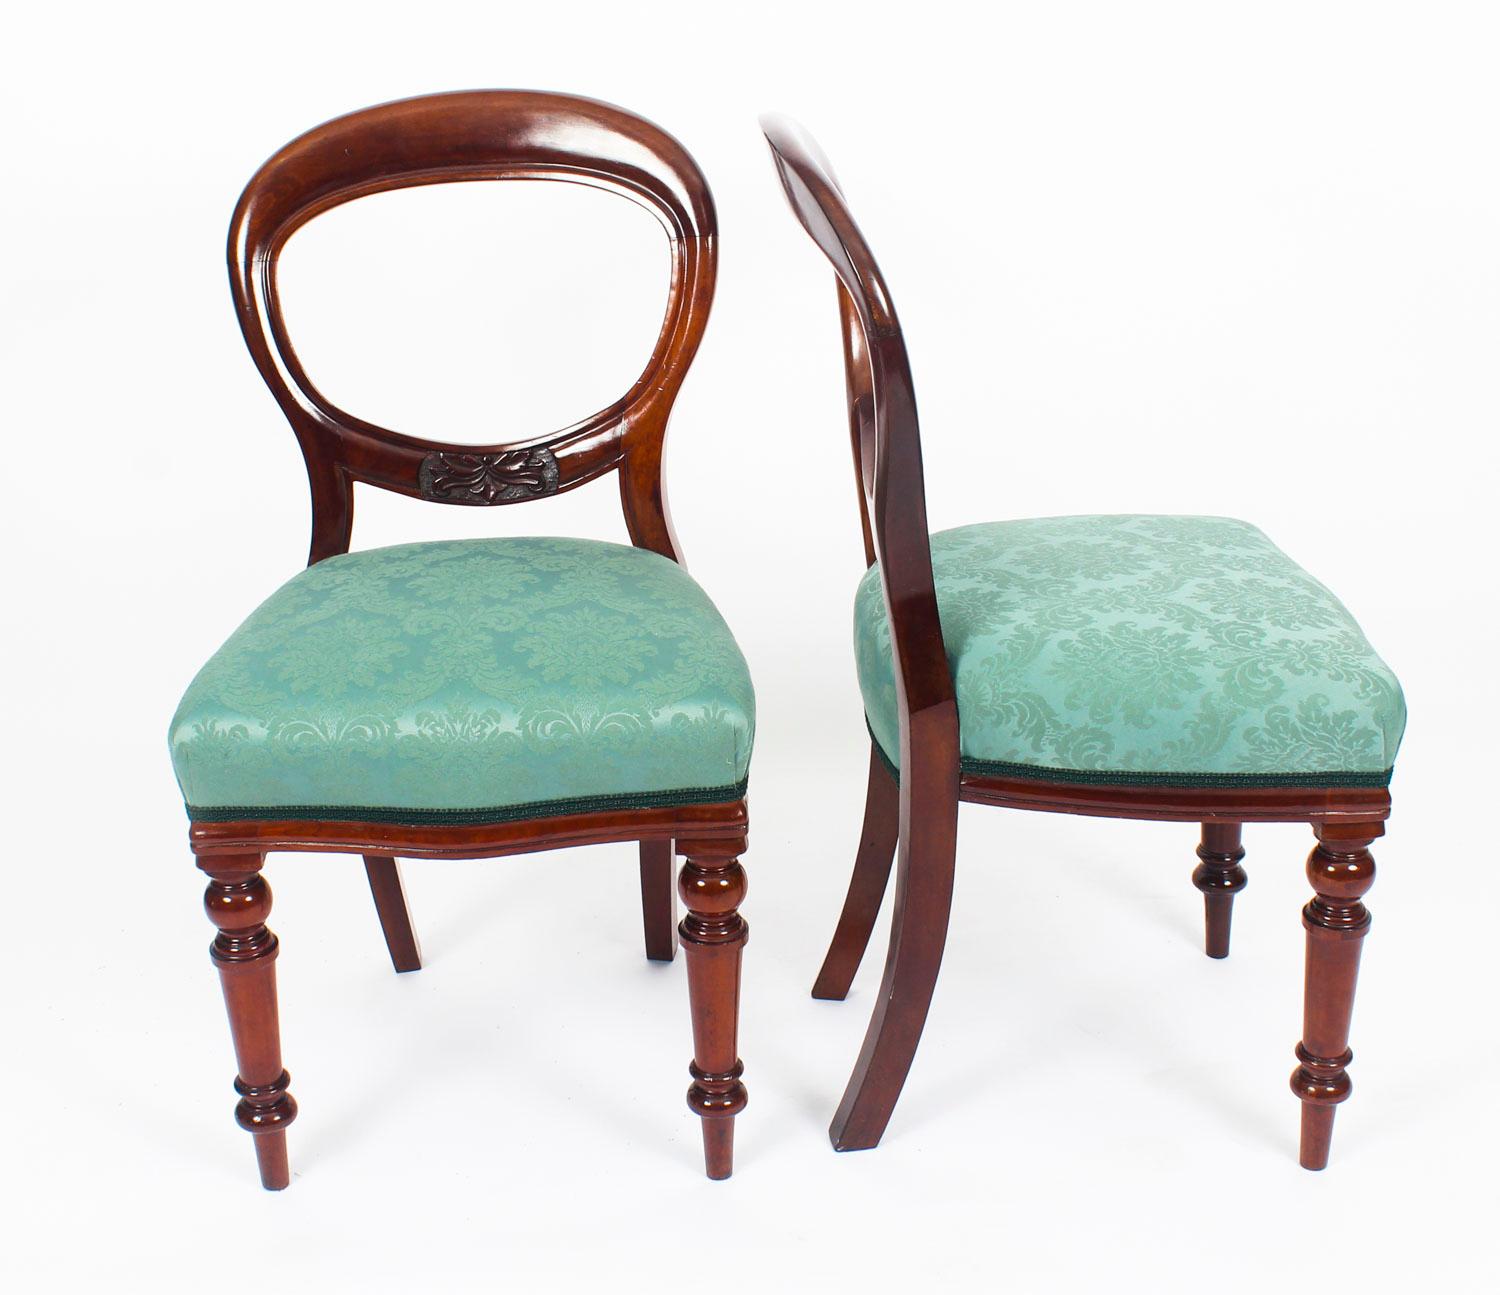 A superb and rare long set of fourteen antique early Victorian walnut balloon back dining chairs, circa 1850 in date.

The molded backs with foliate carved rails over serpentine stuff over seats. They are raised on elegant turned forelegs